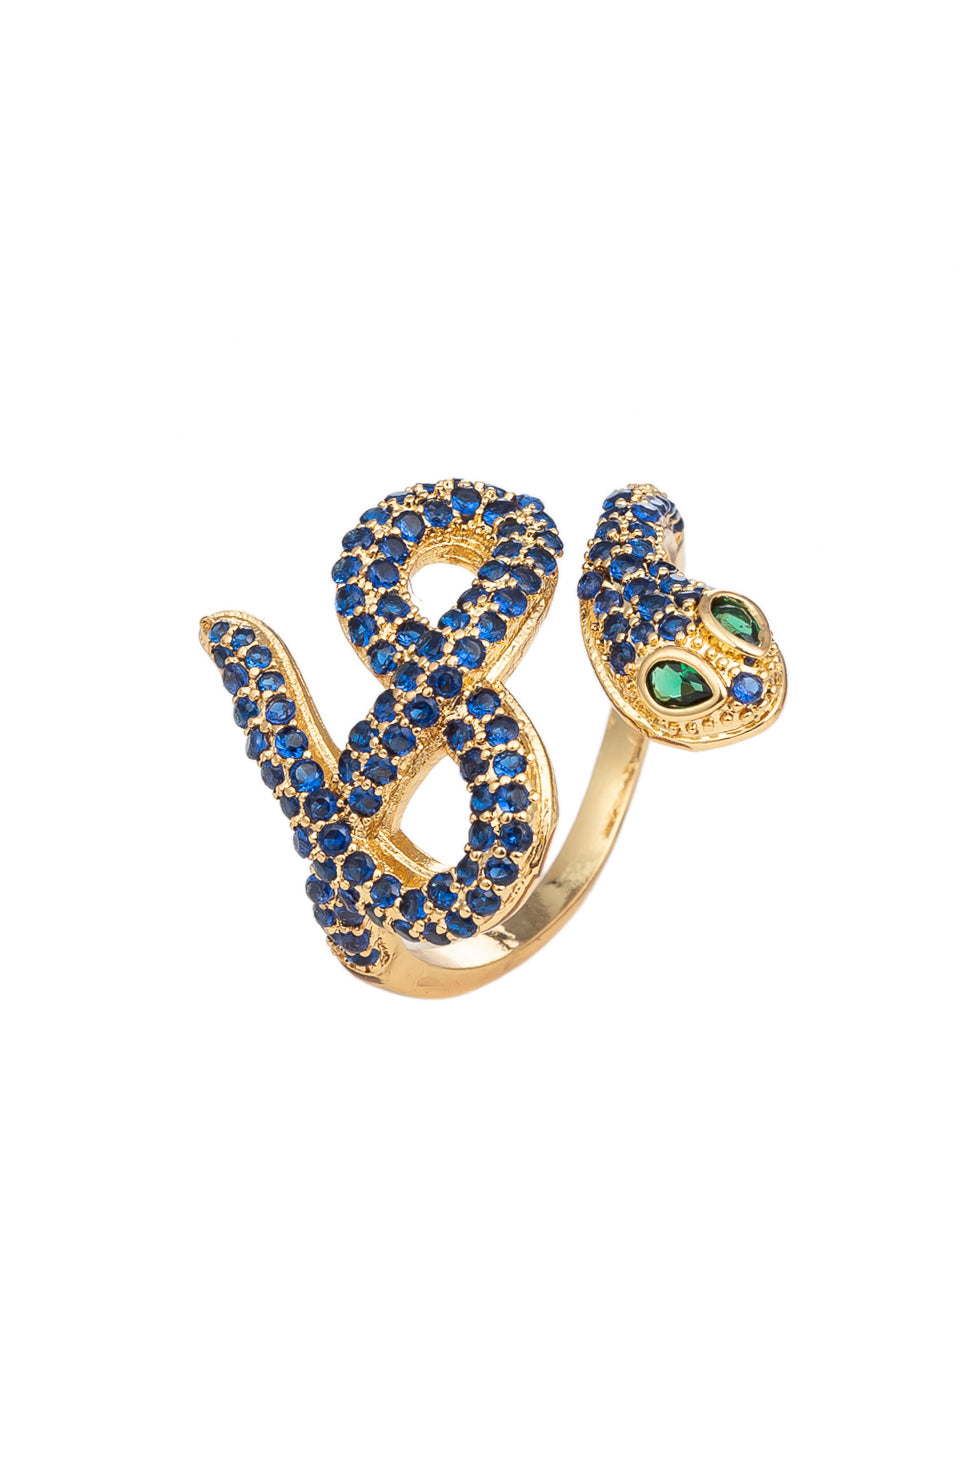 Black gold cobra snake ring studded with CZ crystals.